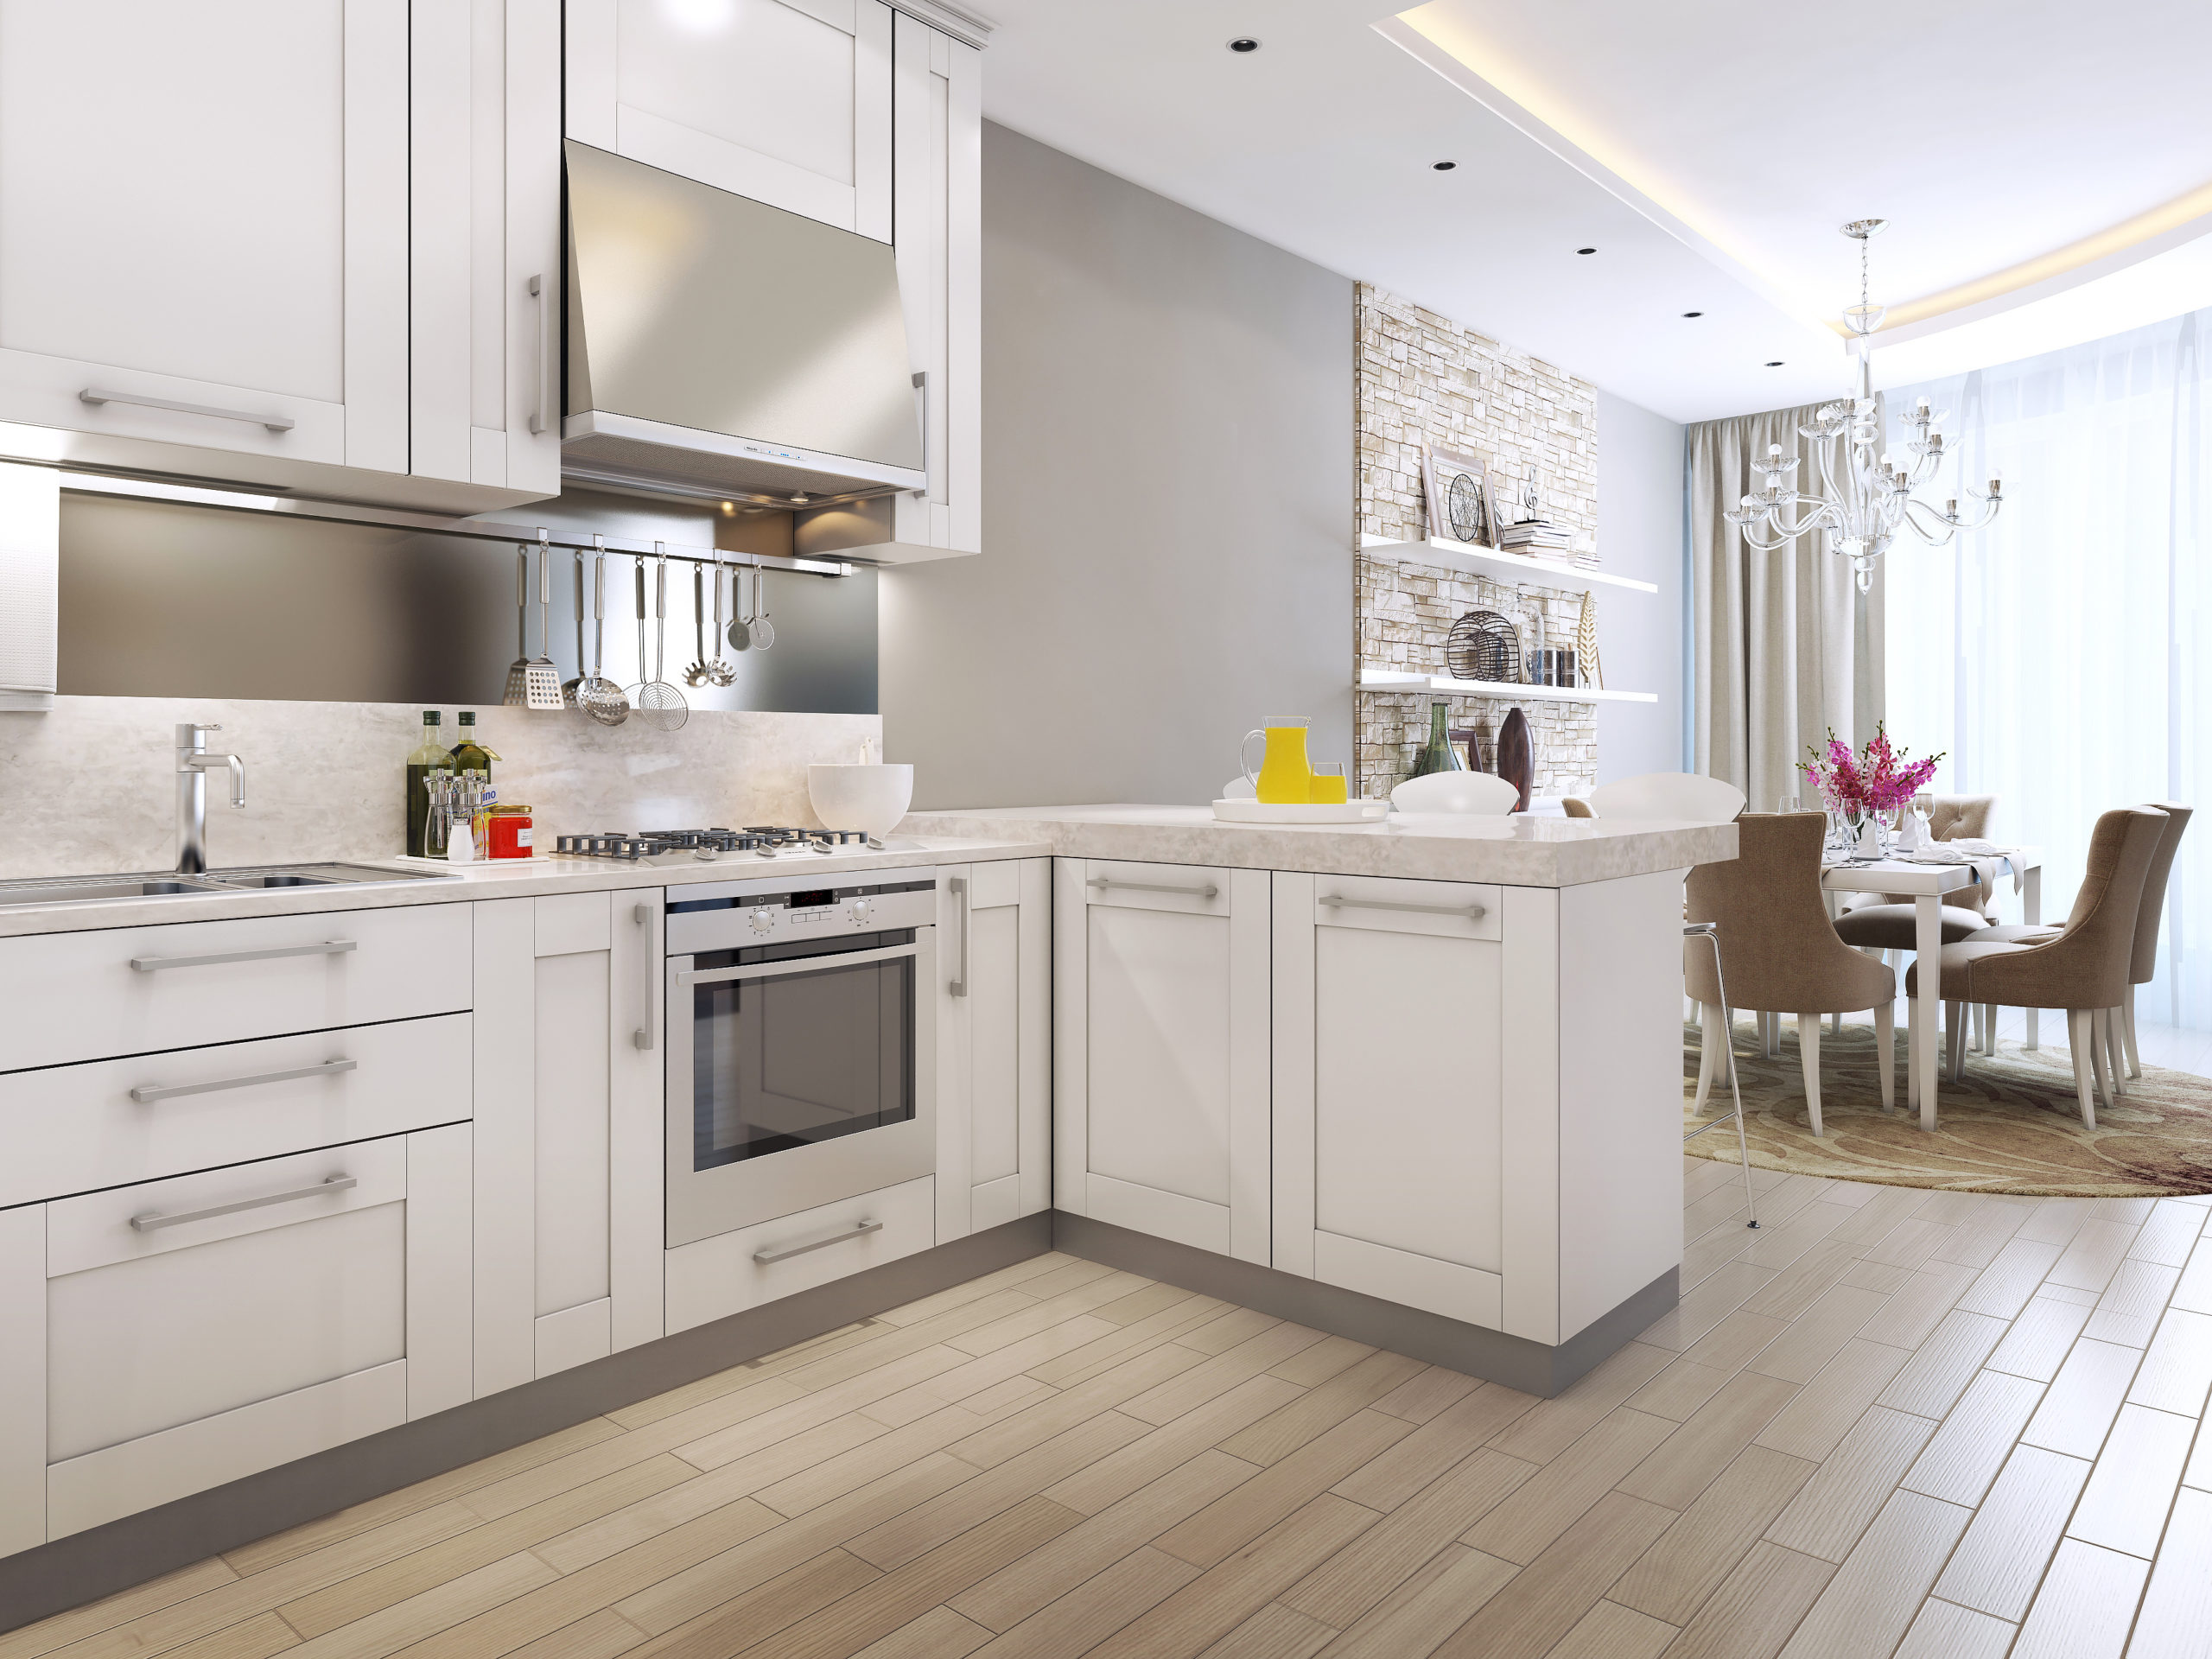 Bright and modern renovated kitchen in a condo with white cabinets and sleek finishes. The kitchen features a large center island with seating, perfect for entertaining